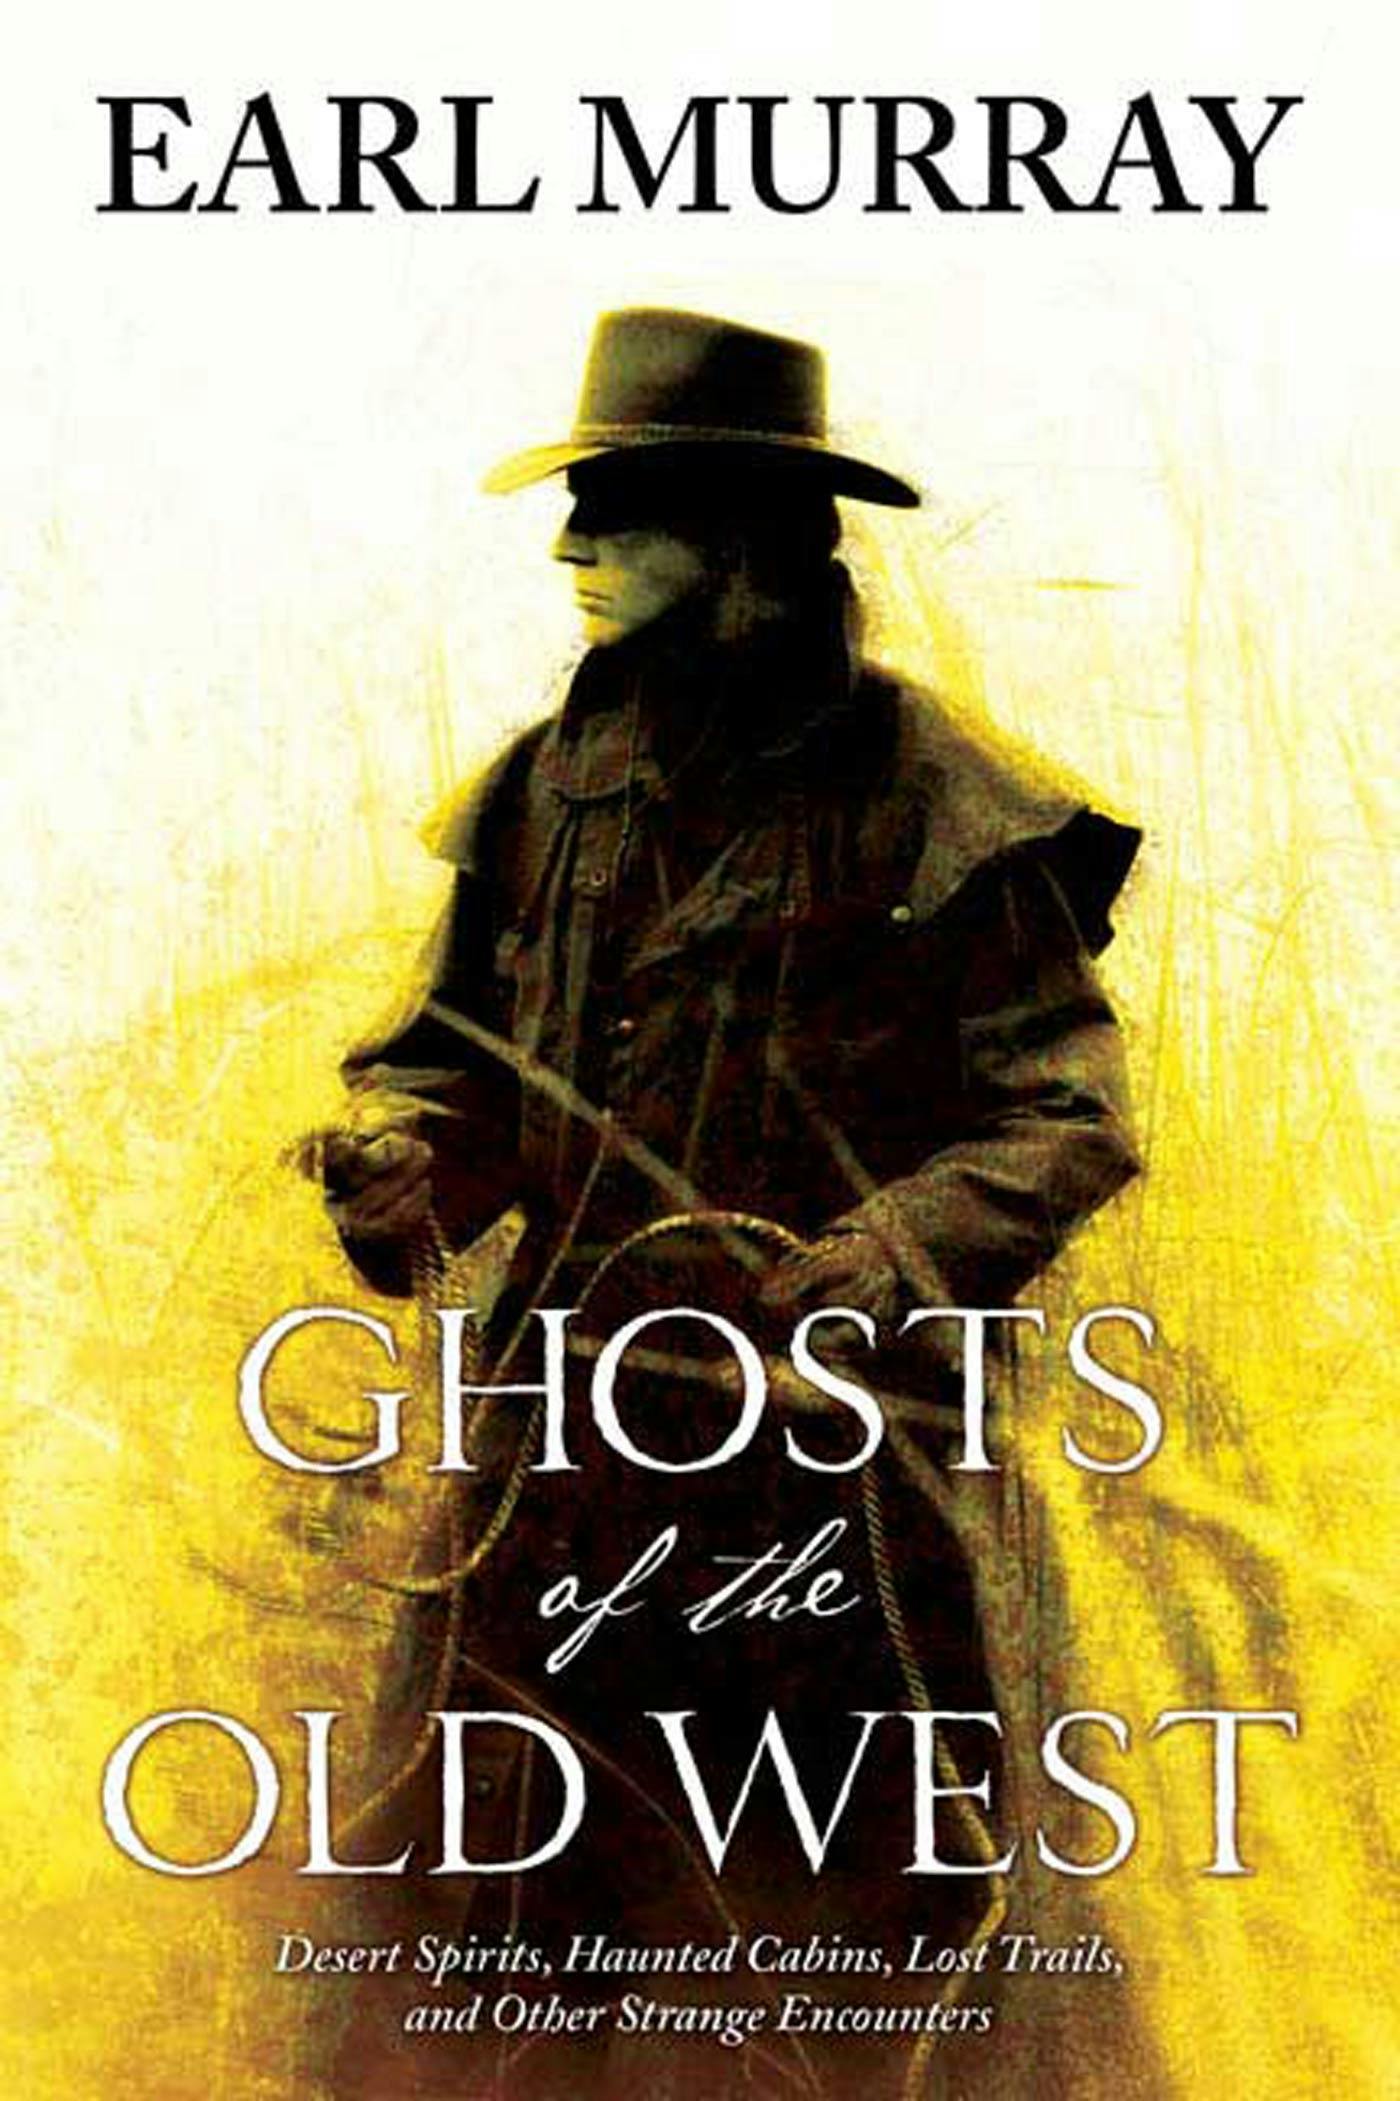 Cover for the book titled as: Ghosts of the Old West